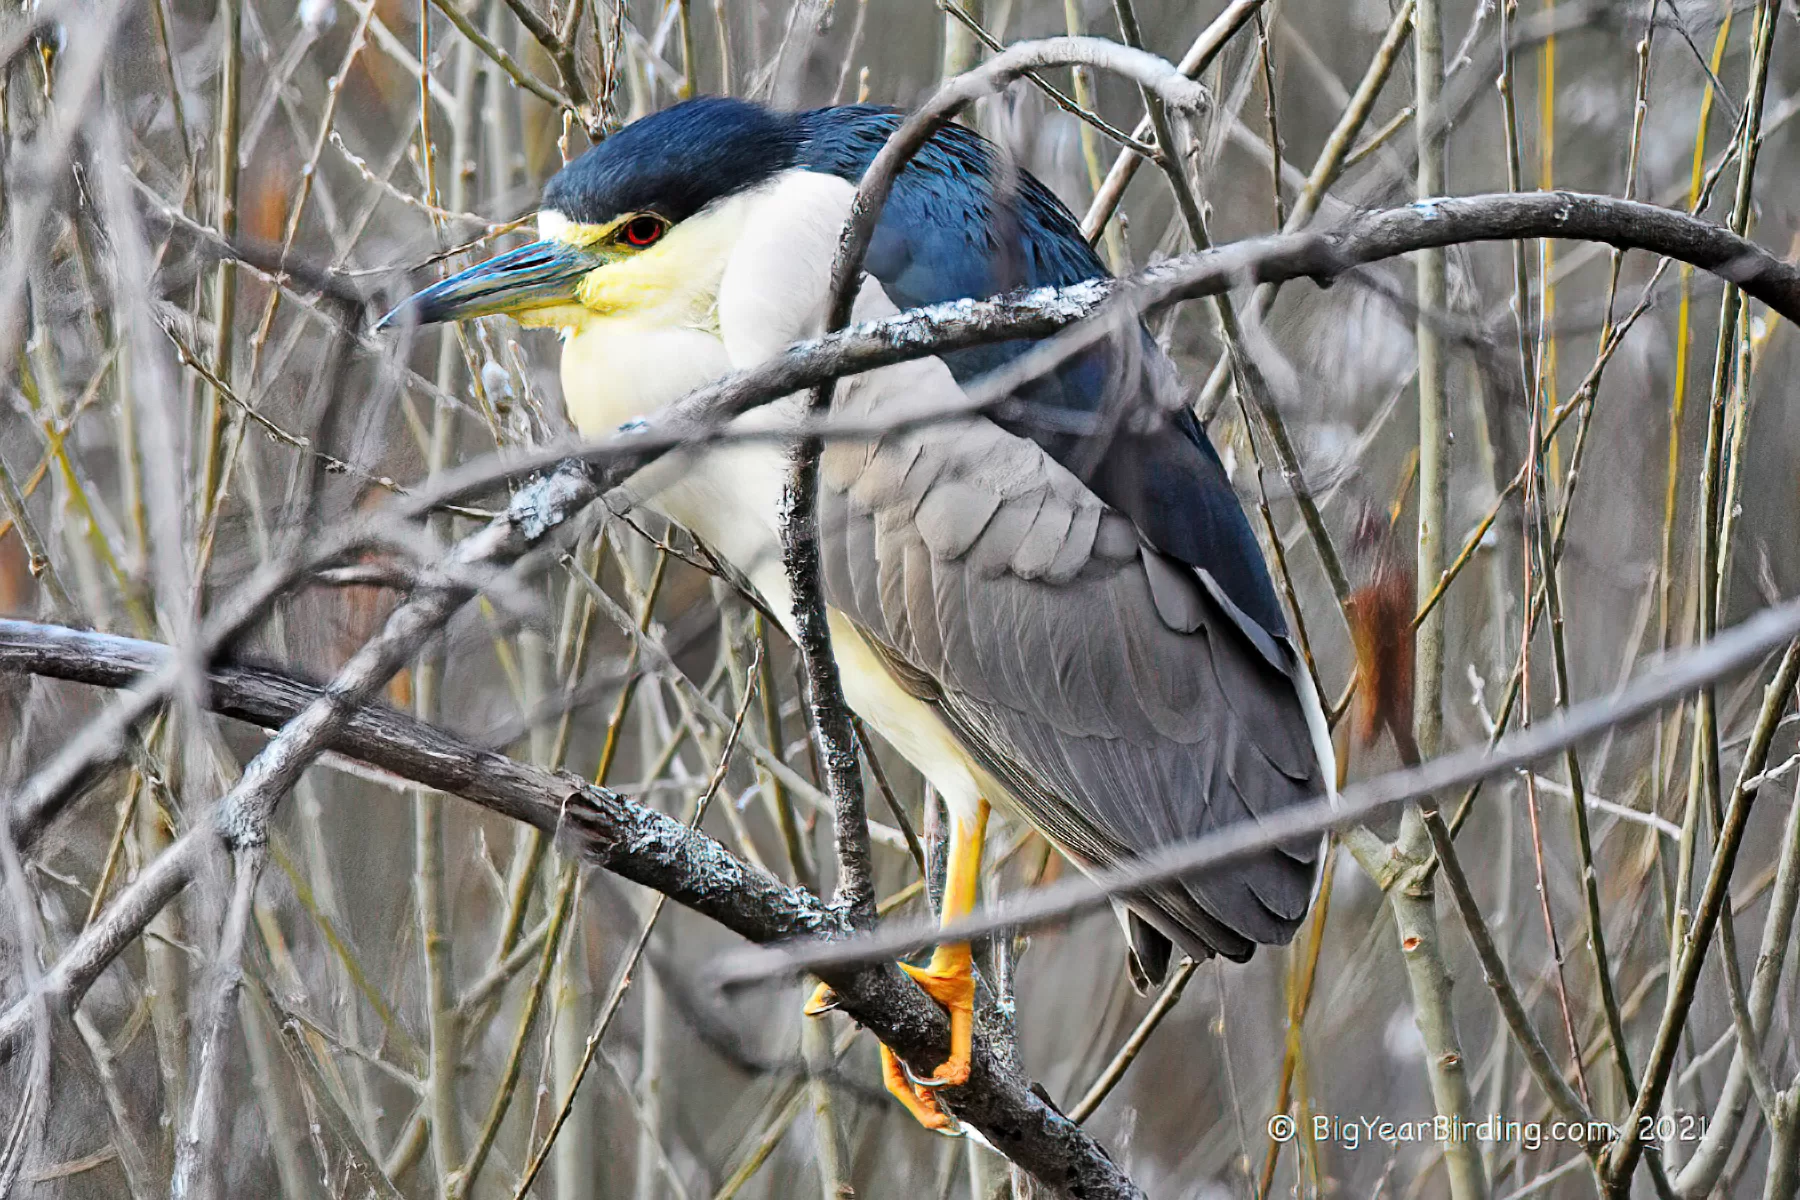 A black-crowned night heron, photographed on April 2, 2021, by Ethan Whitaker '80.